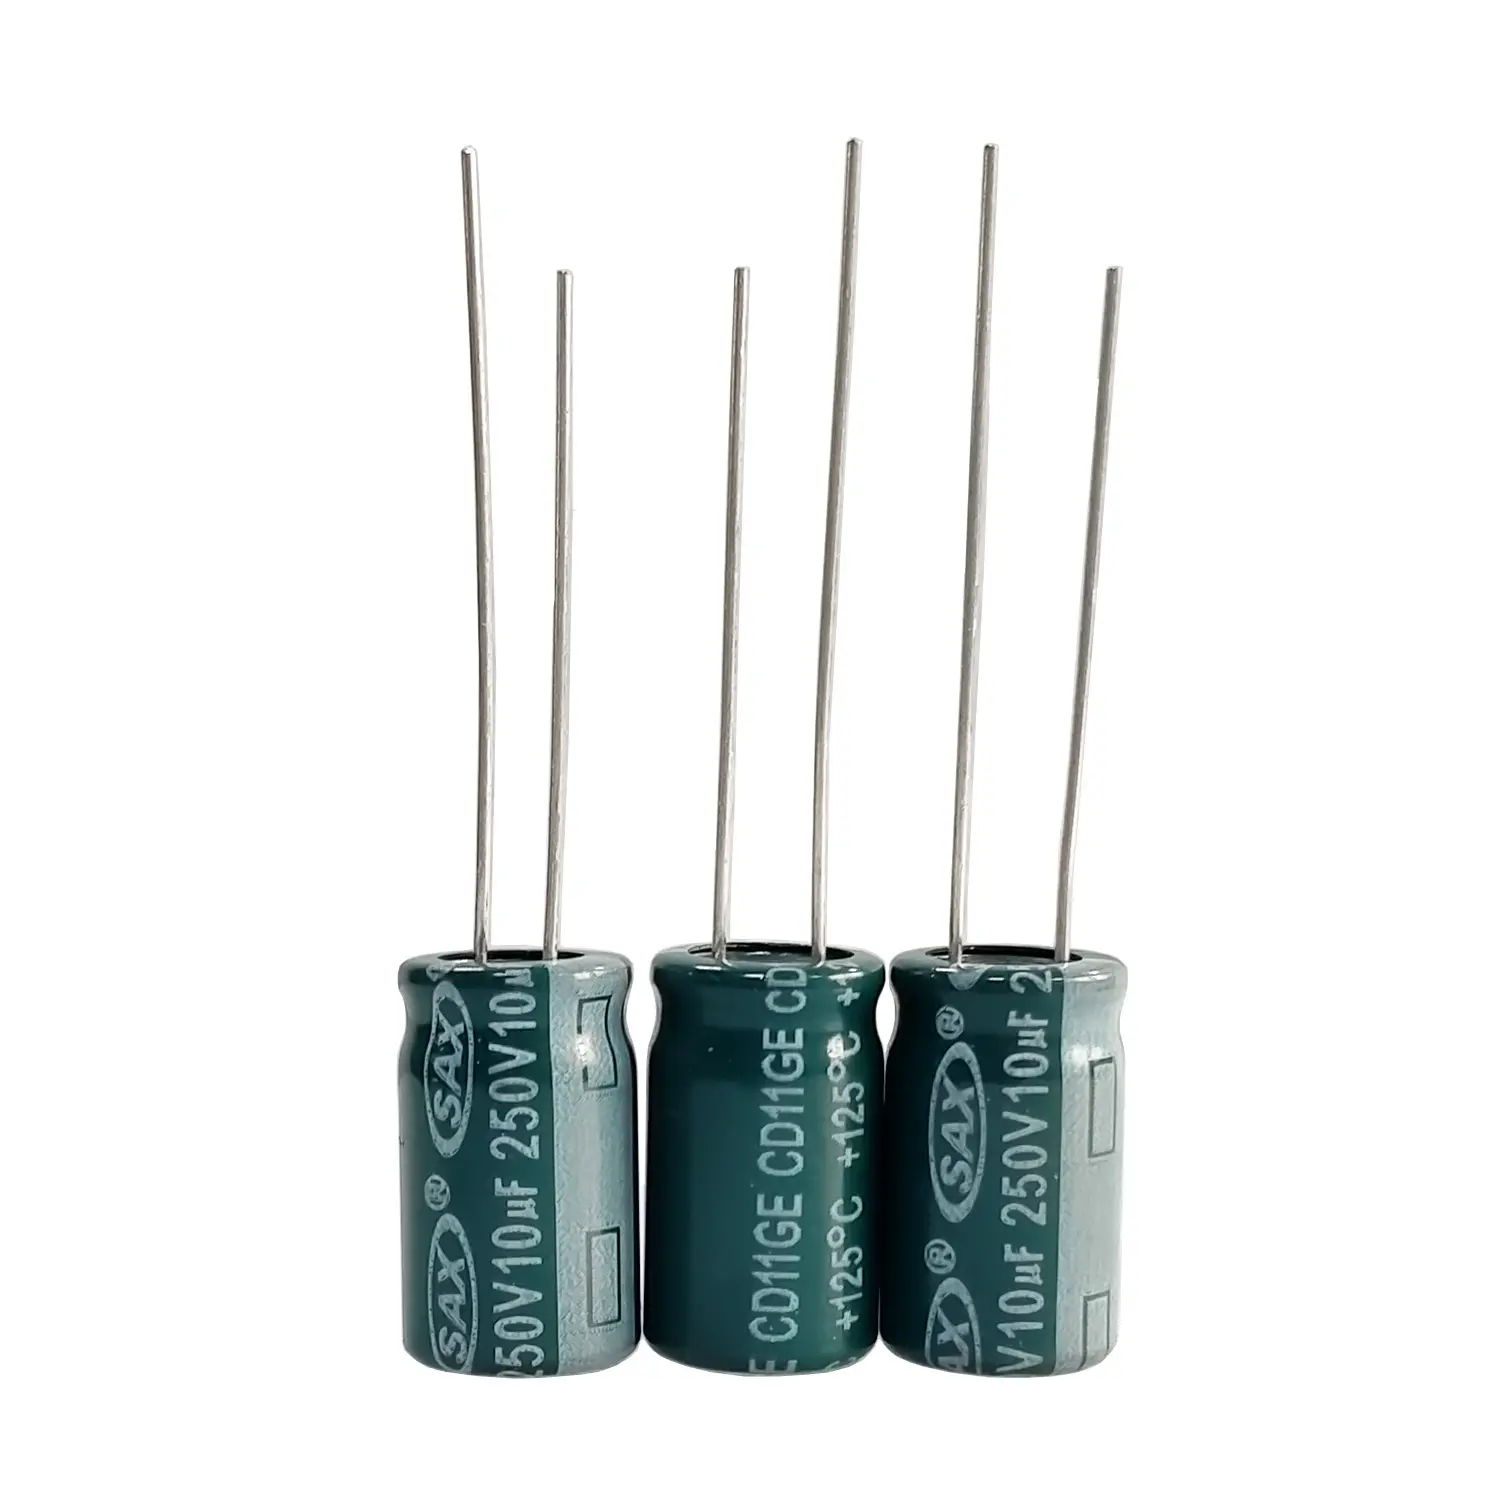 SAX GE 10uf 250V capacitor electrolytic max well super capacitors bank